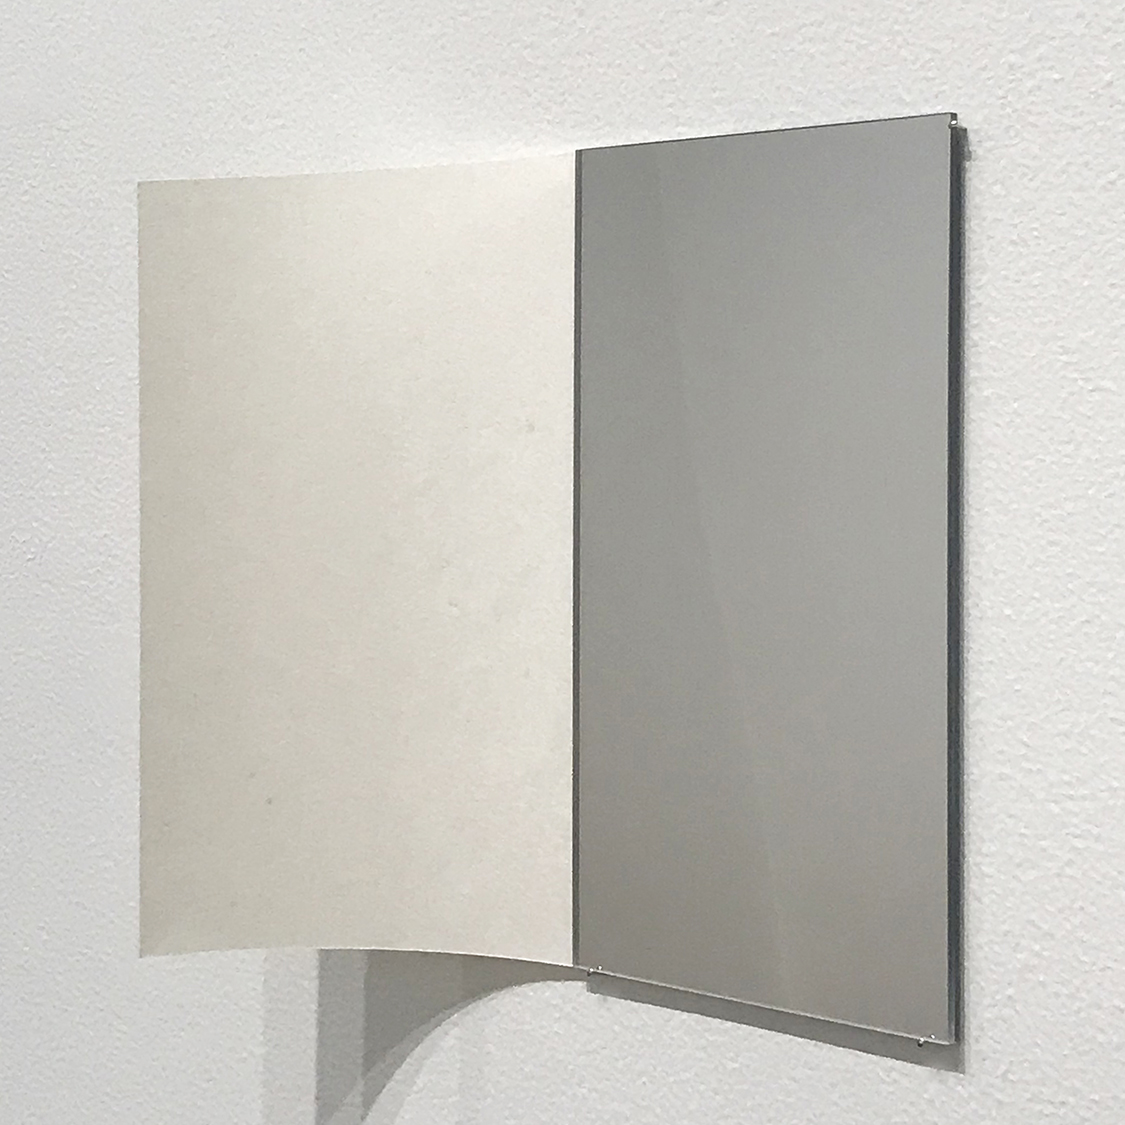 　　　Untitled, Acrylic mirror, Japanese paper, 217 × ２ × 190 mm, 2020